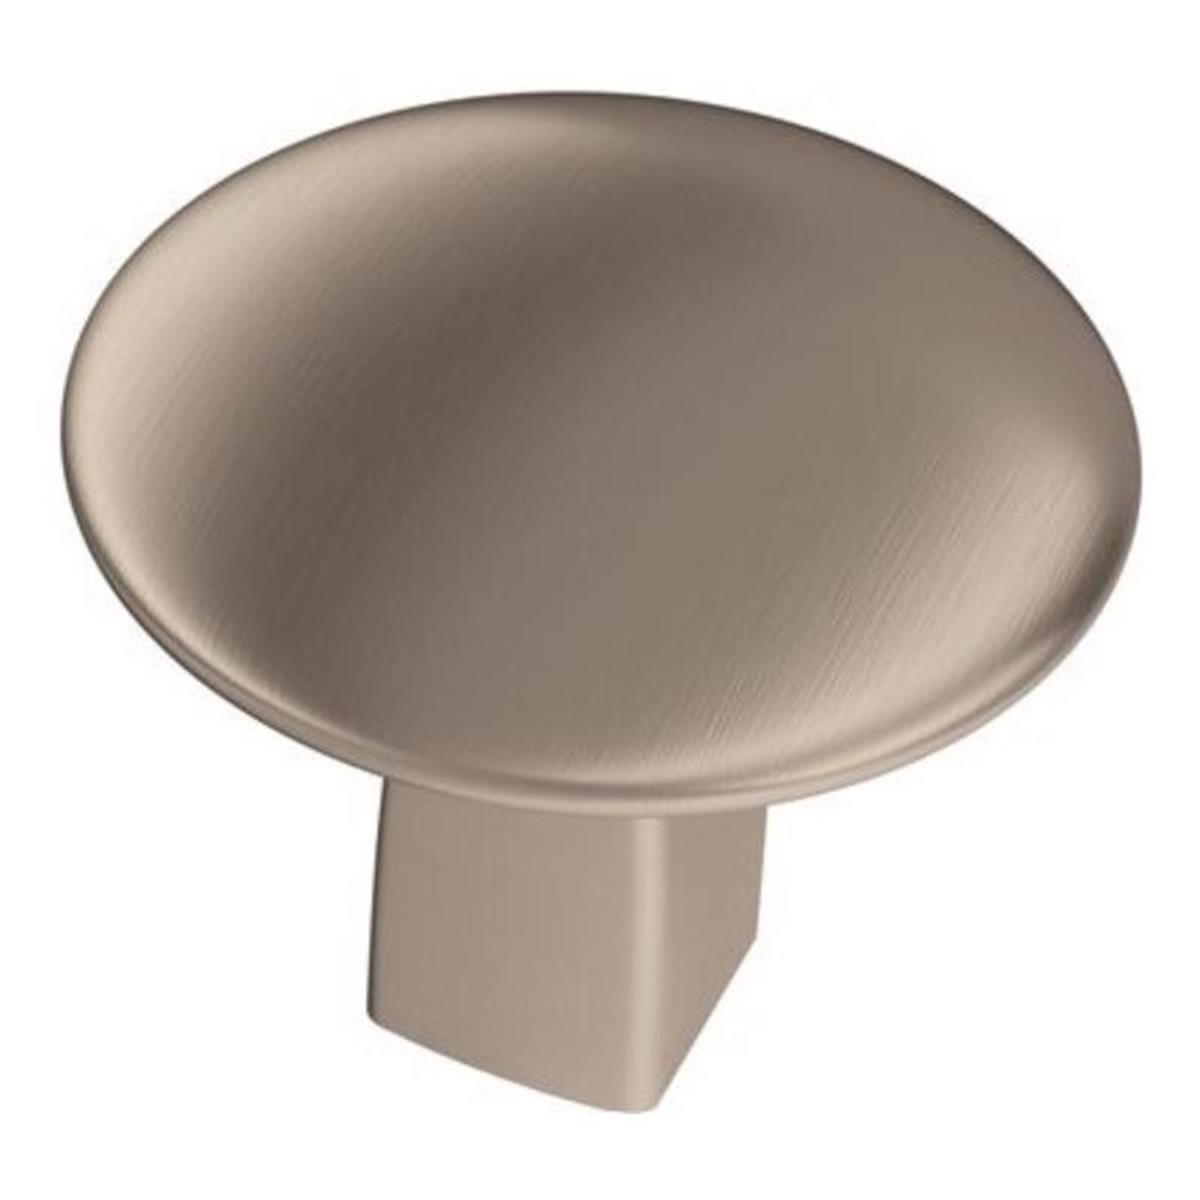 Picture of Amerock 5038348 1.25 x 1.063 in. Riva Oval Cabinet Knob, Satin Nickel - Pack of 25